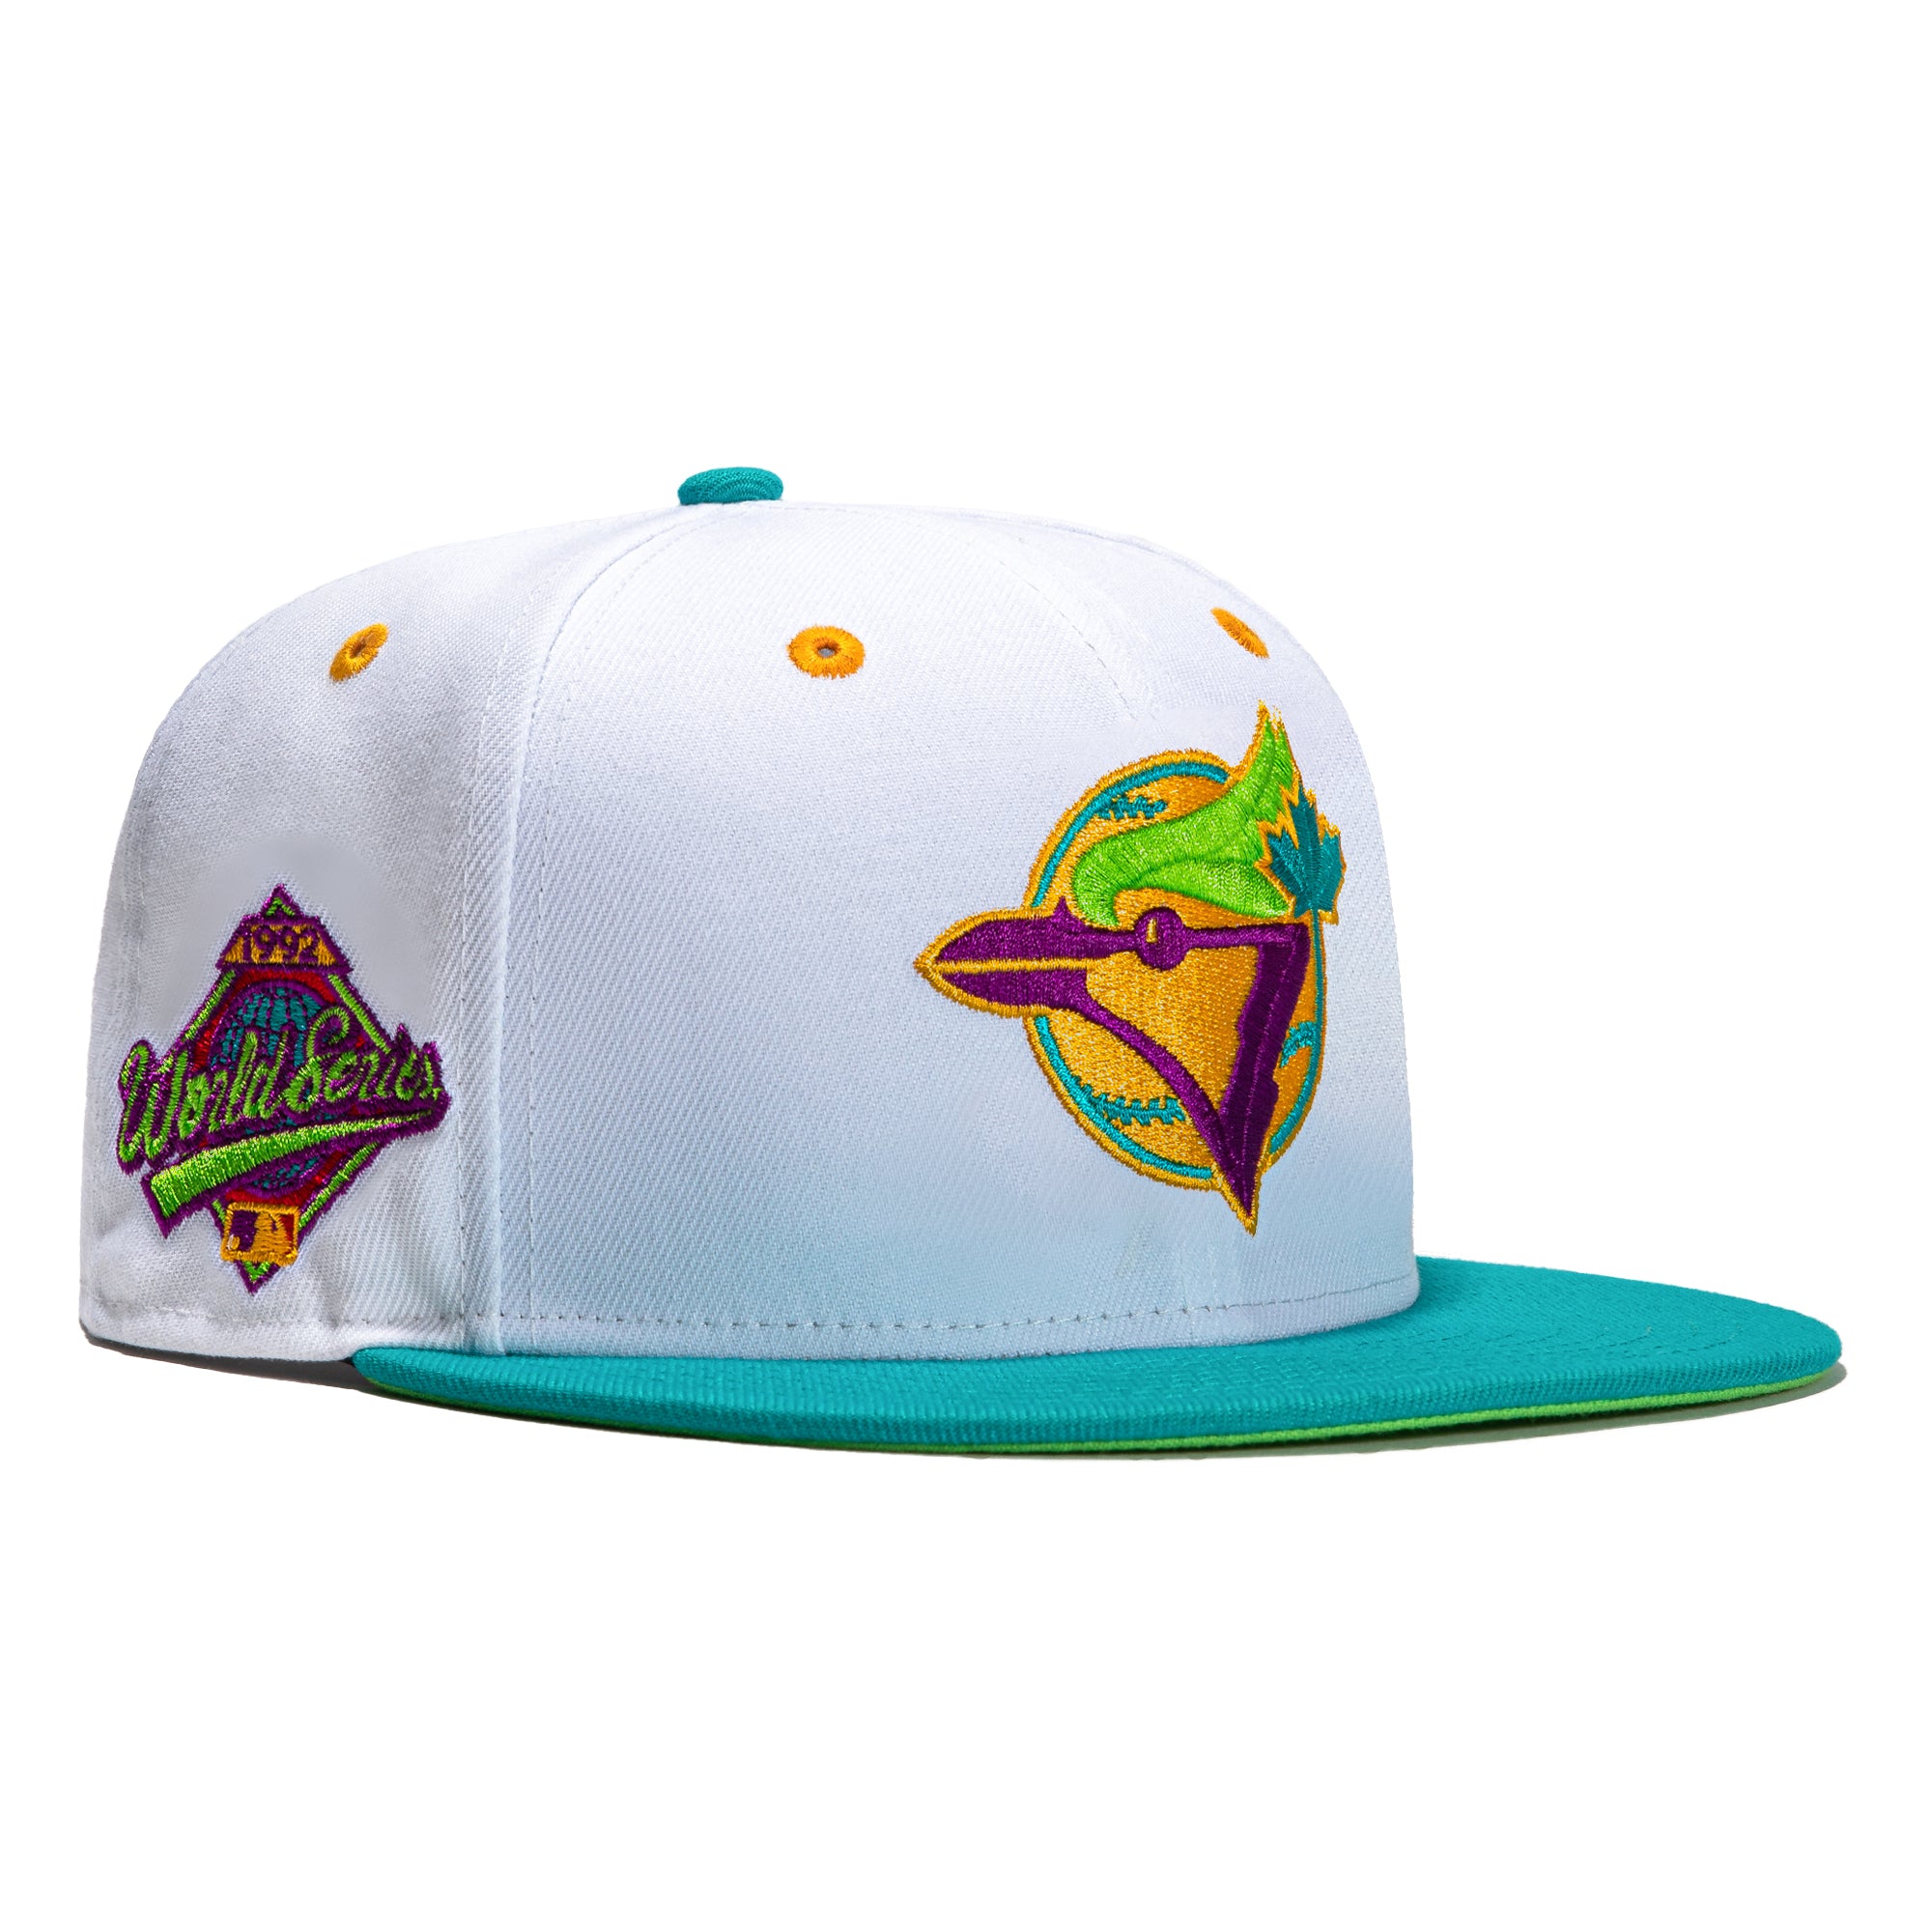 New Era 59FIFTY Teal Lime Toronto Blue Jays 1992 World Series Patch Hat - White, Teal White/Teal / 7 5/8